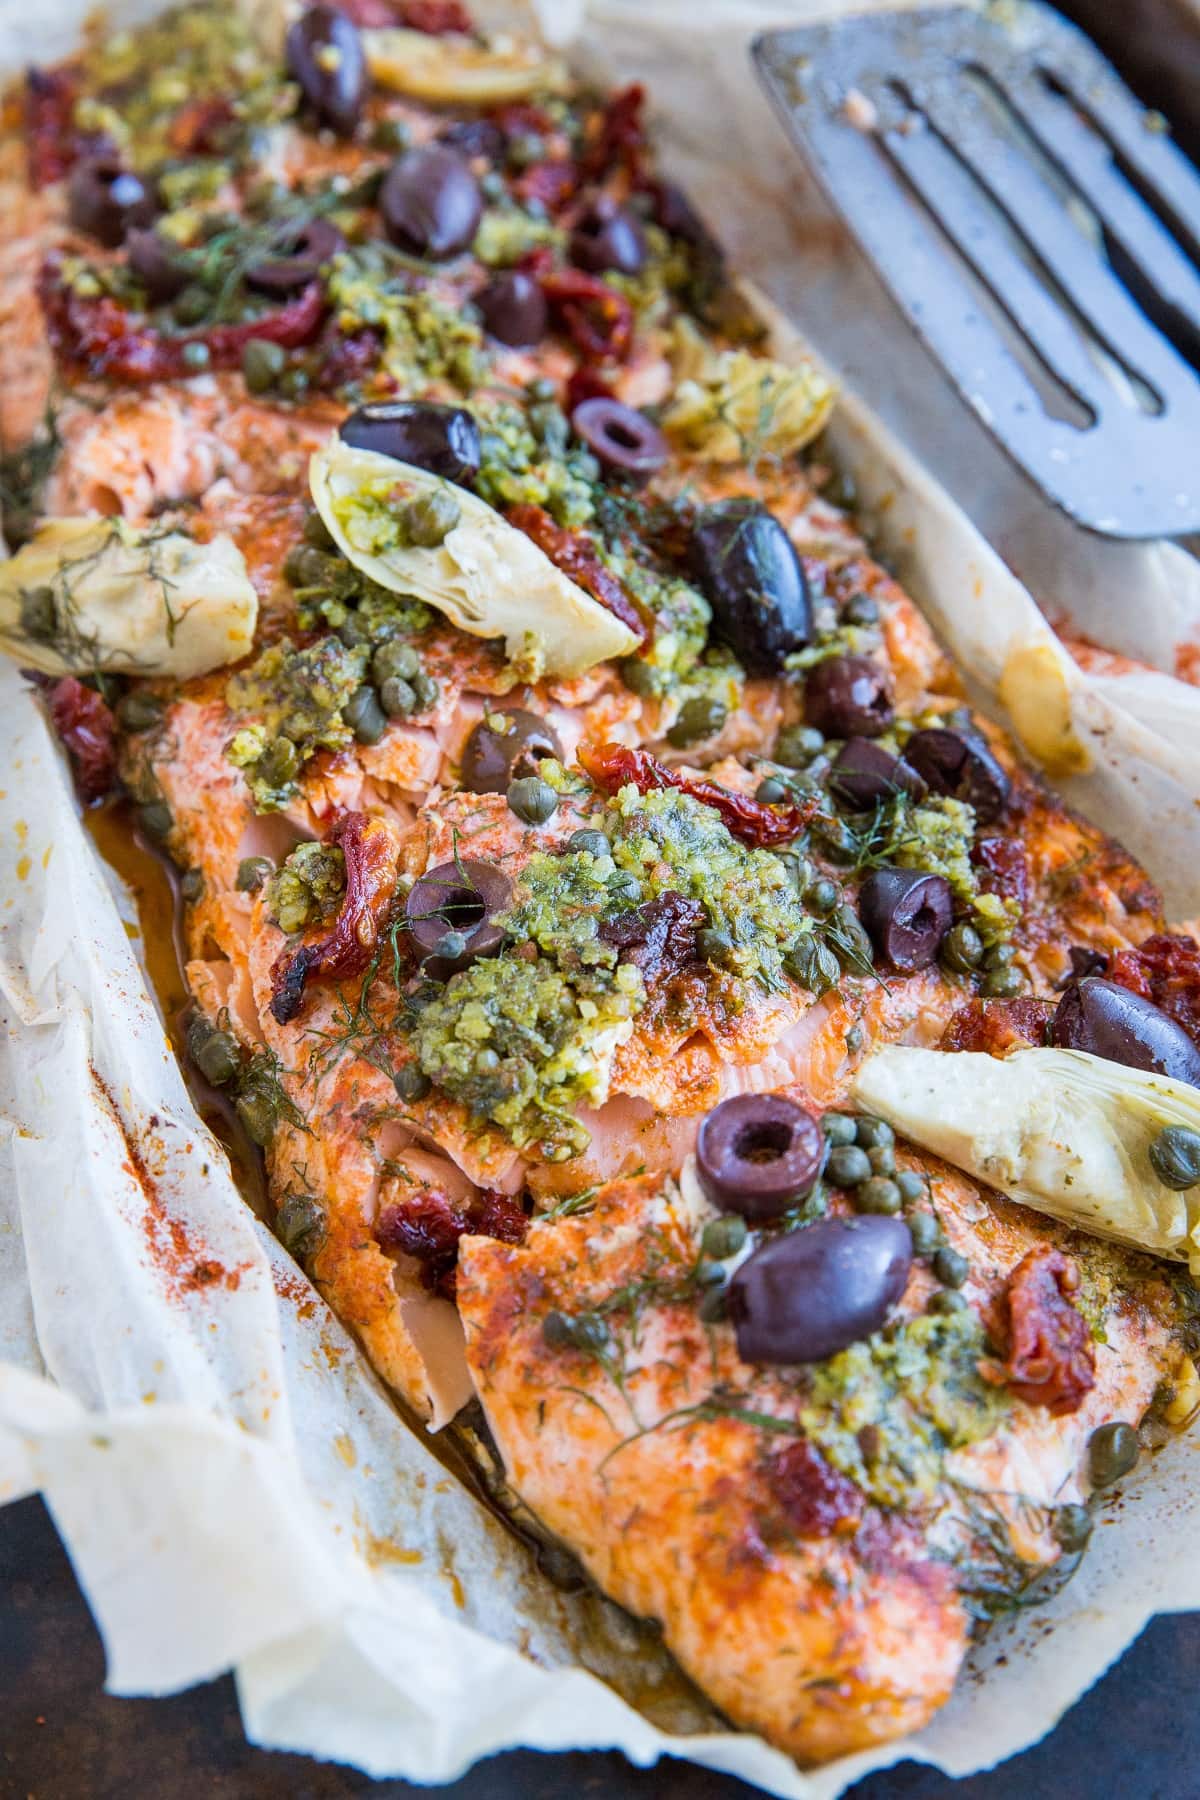 Mediterranean-inspired Salmon in Parchment Paper (or fish en papillote) with sun-dried tomatoes, kalamata olives, dill, capers, and artichoke hearts. This easy dinner recipe is paleo, keto, and packed with flavor!